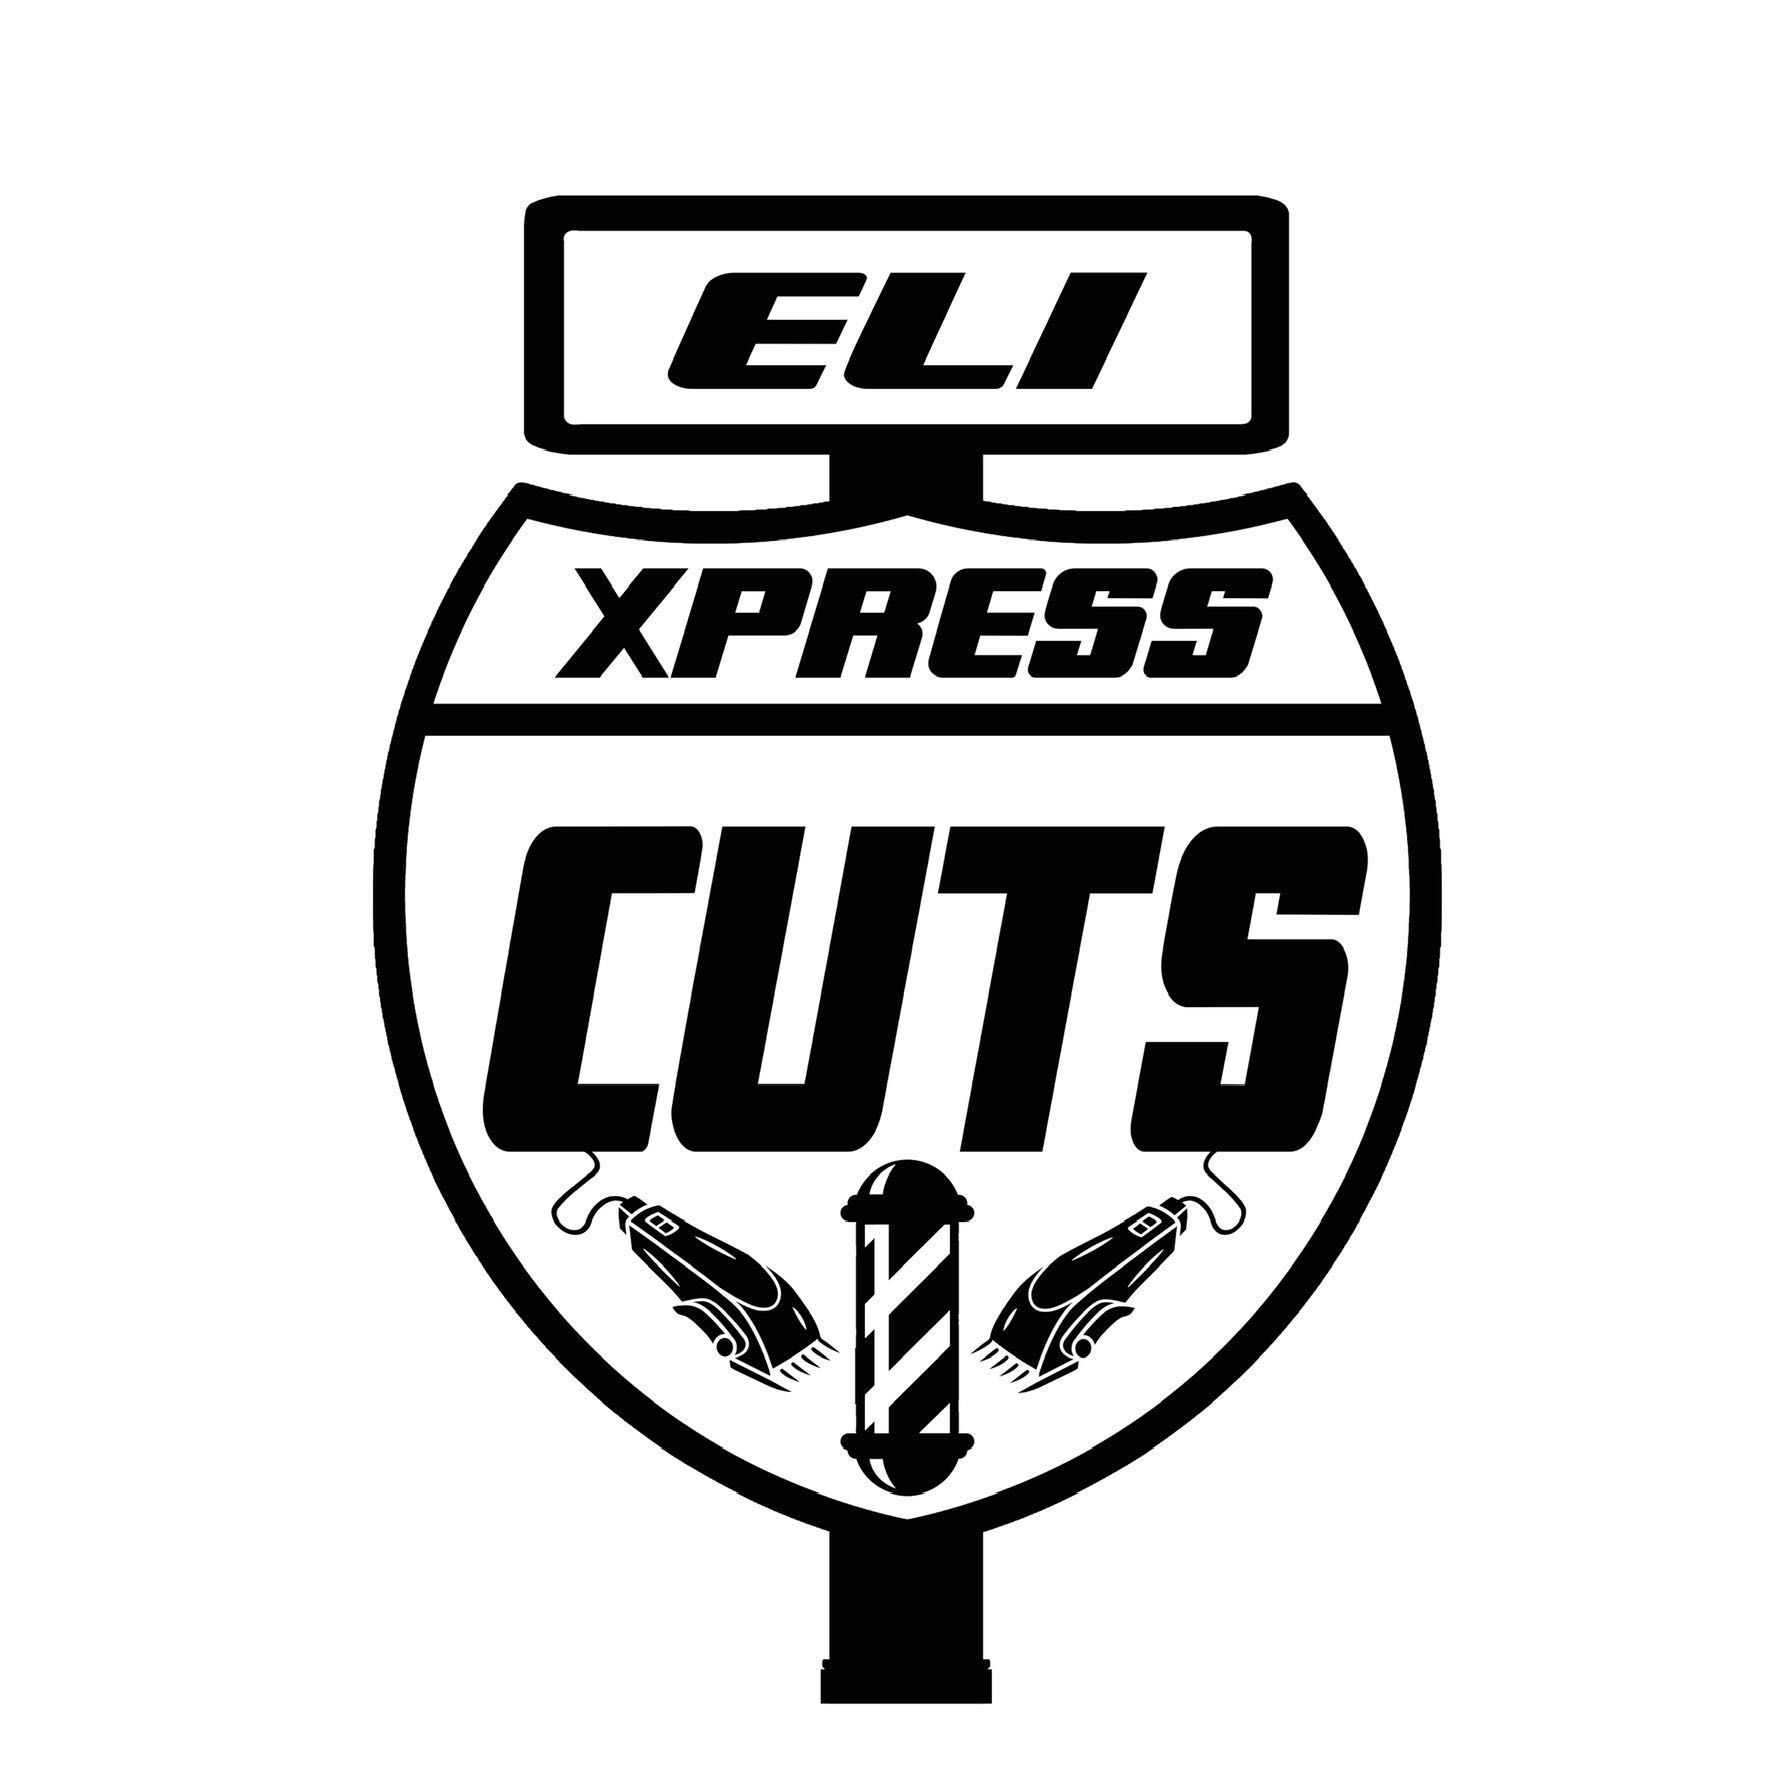 Eli Xpress Cuts, 345 Frontage Rd, Clermont, 34711